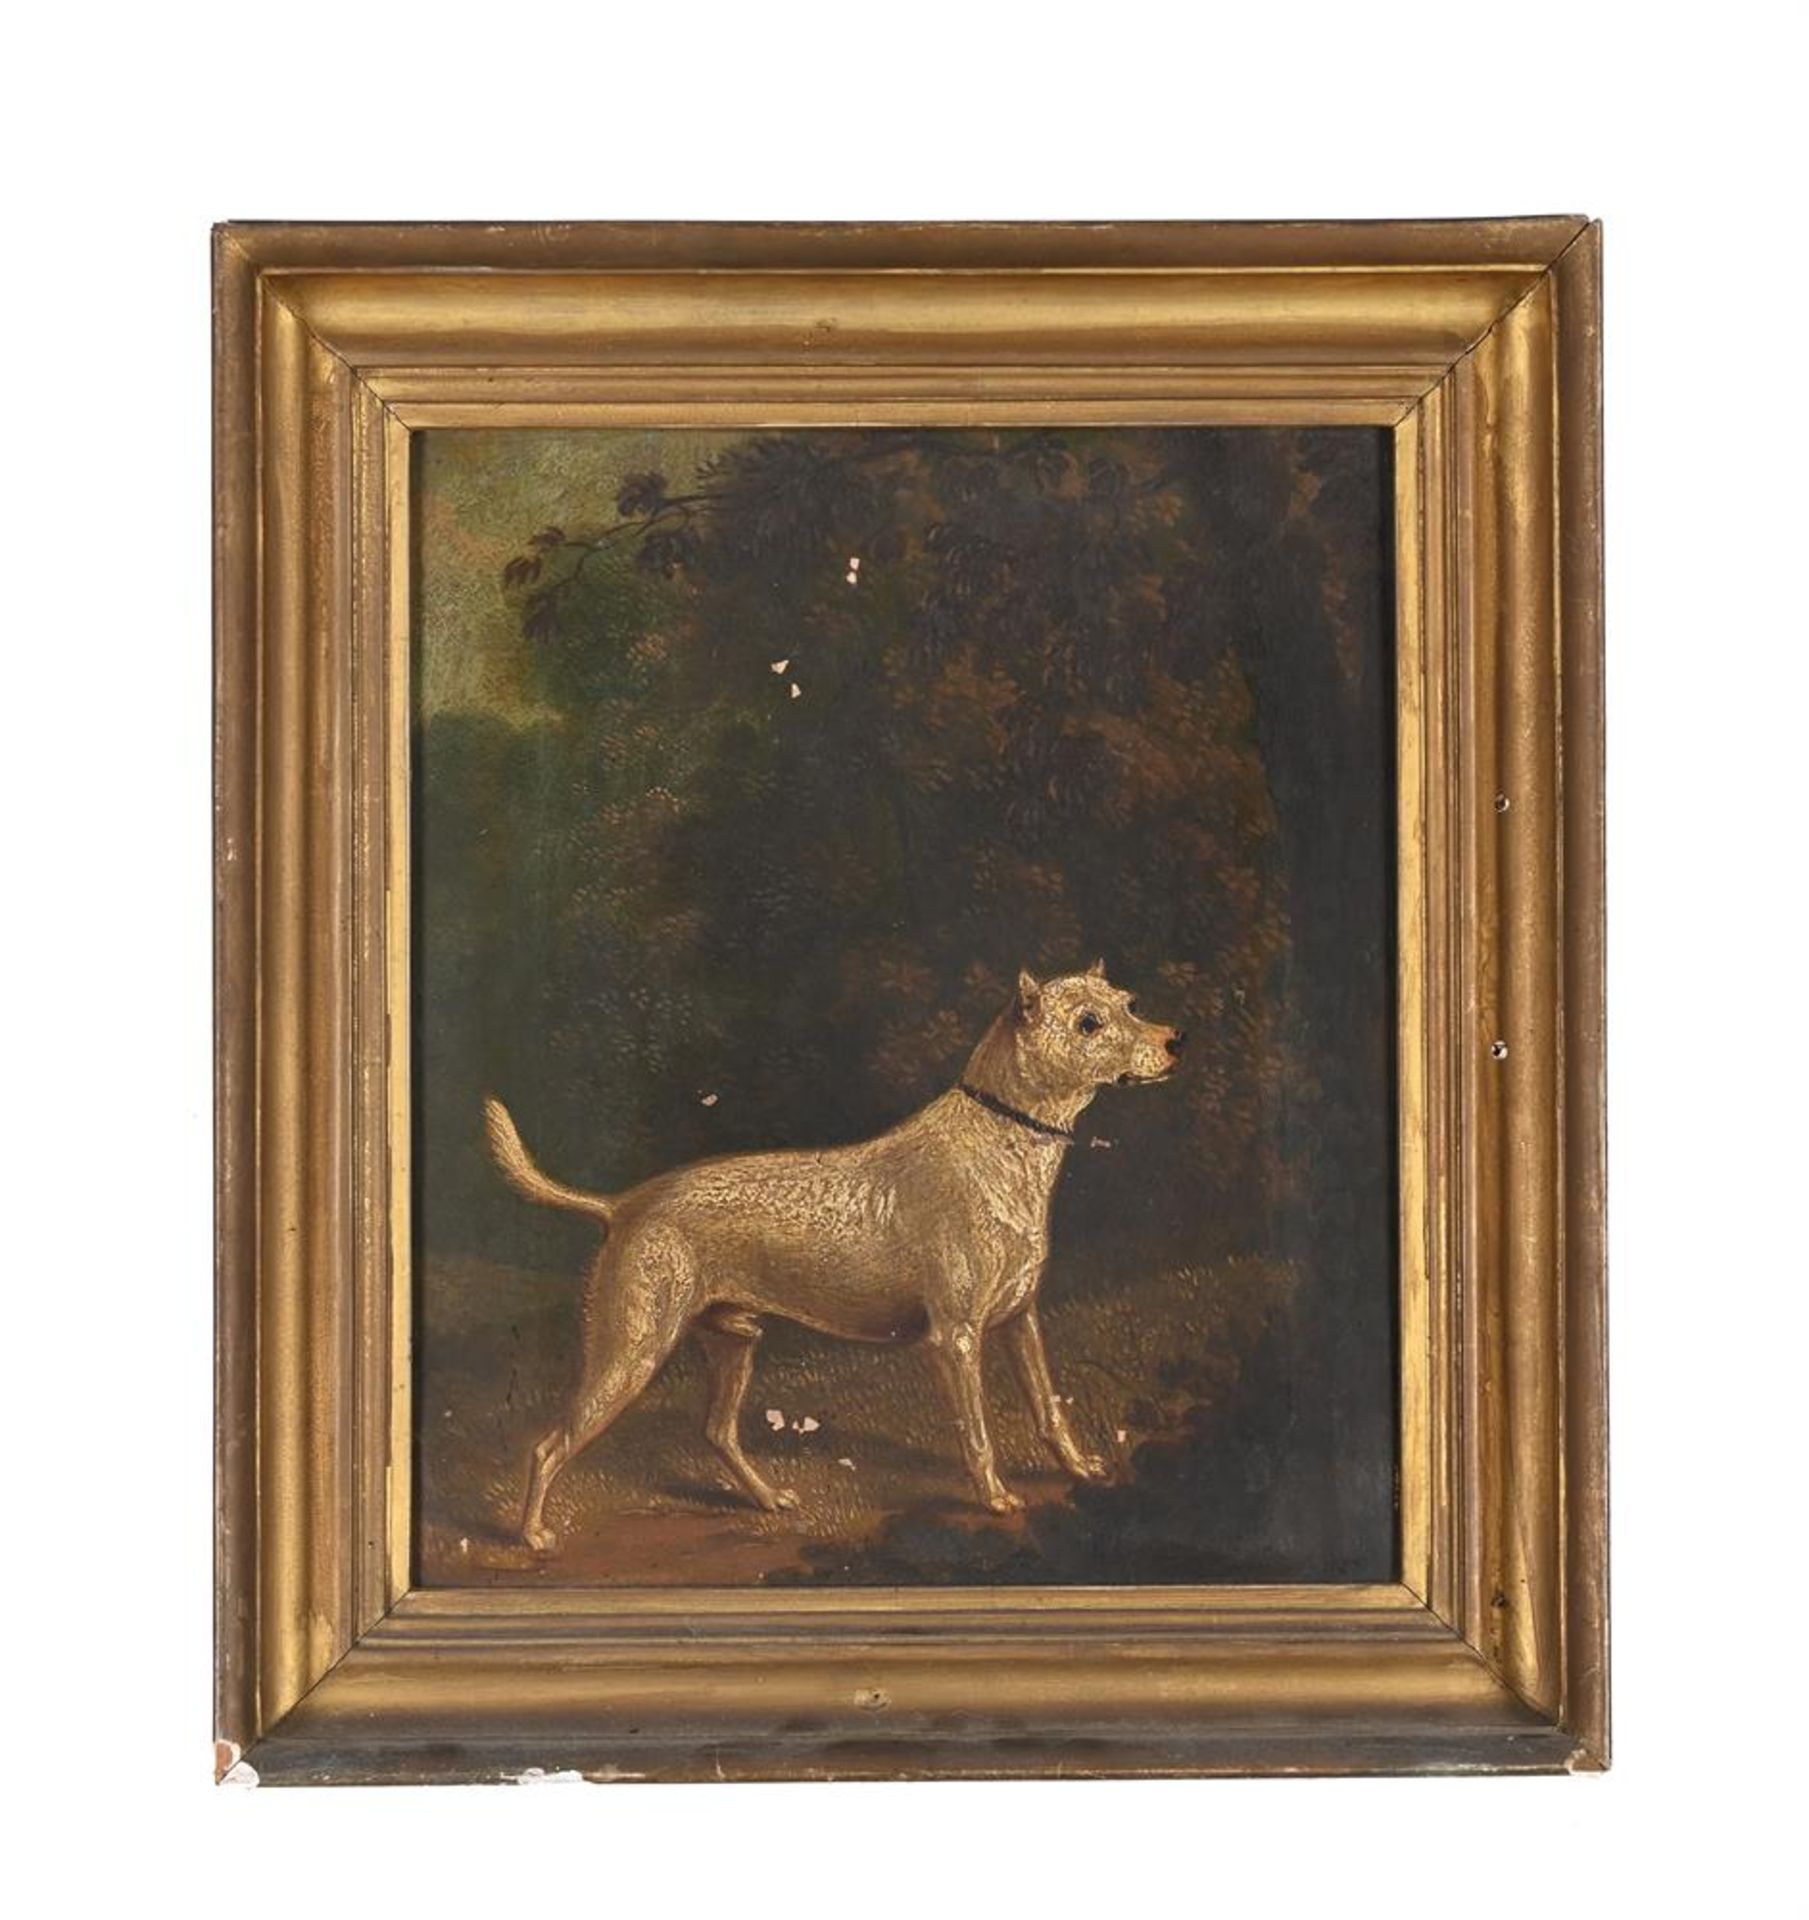 ENGLISH SCHOOL (19TH CENTURY), STUDY OF A TERRIER IN A LANDSCAPE